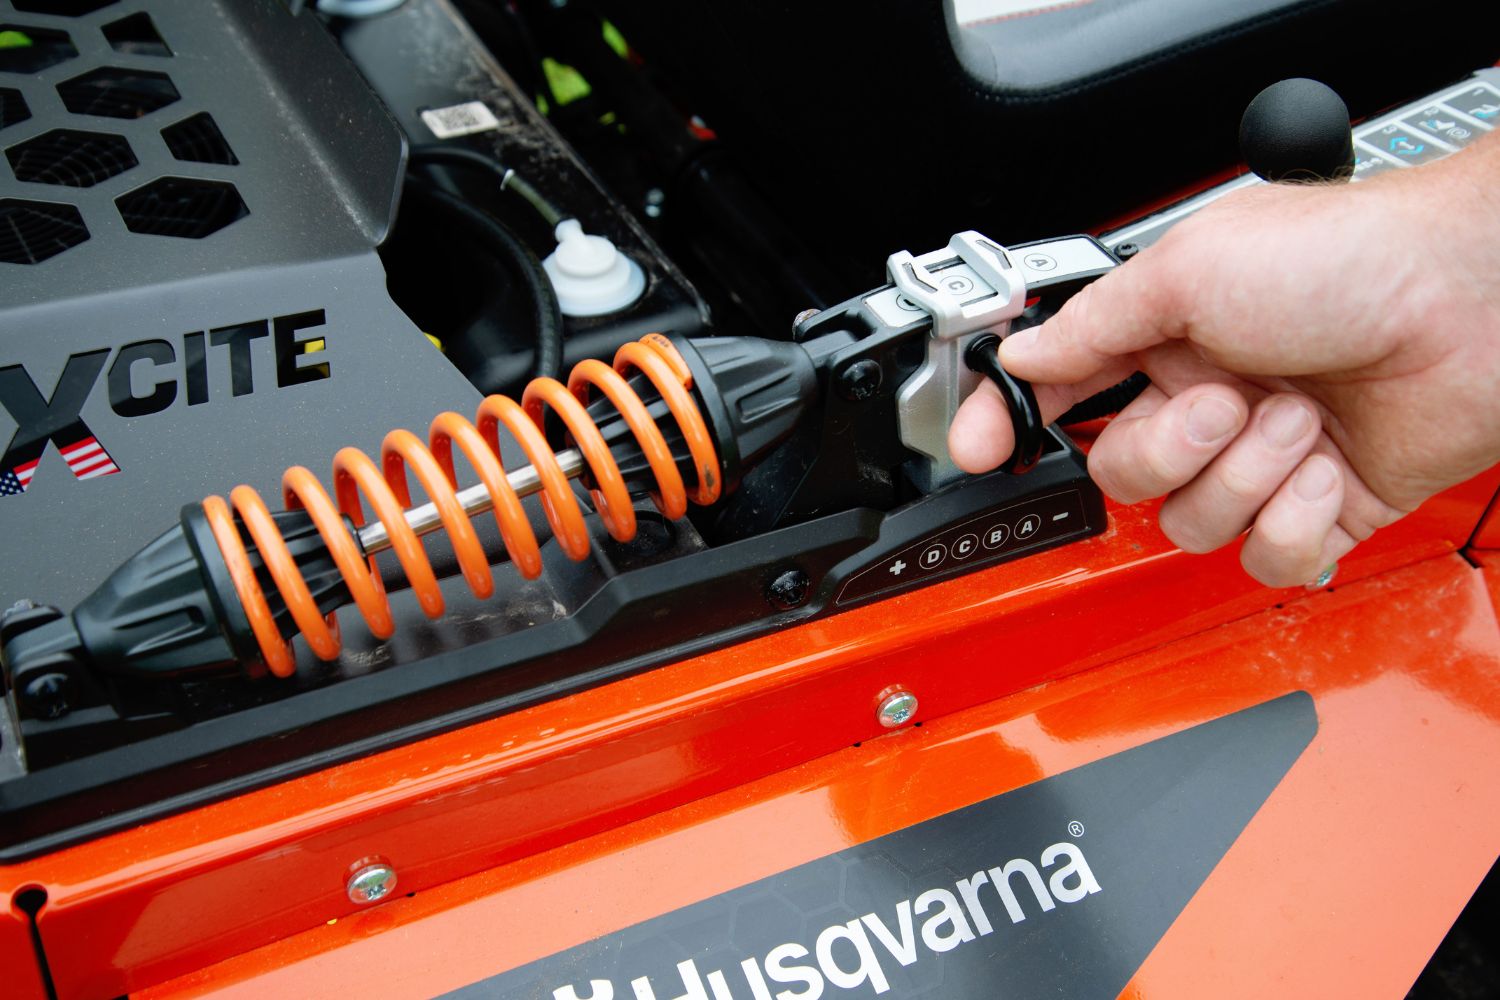 A close-up of the SmoothRide suspension system on the Husqvarna XCite 350 zero turn riding mower